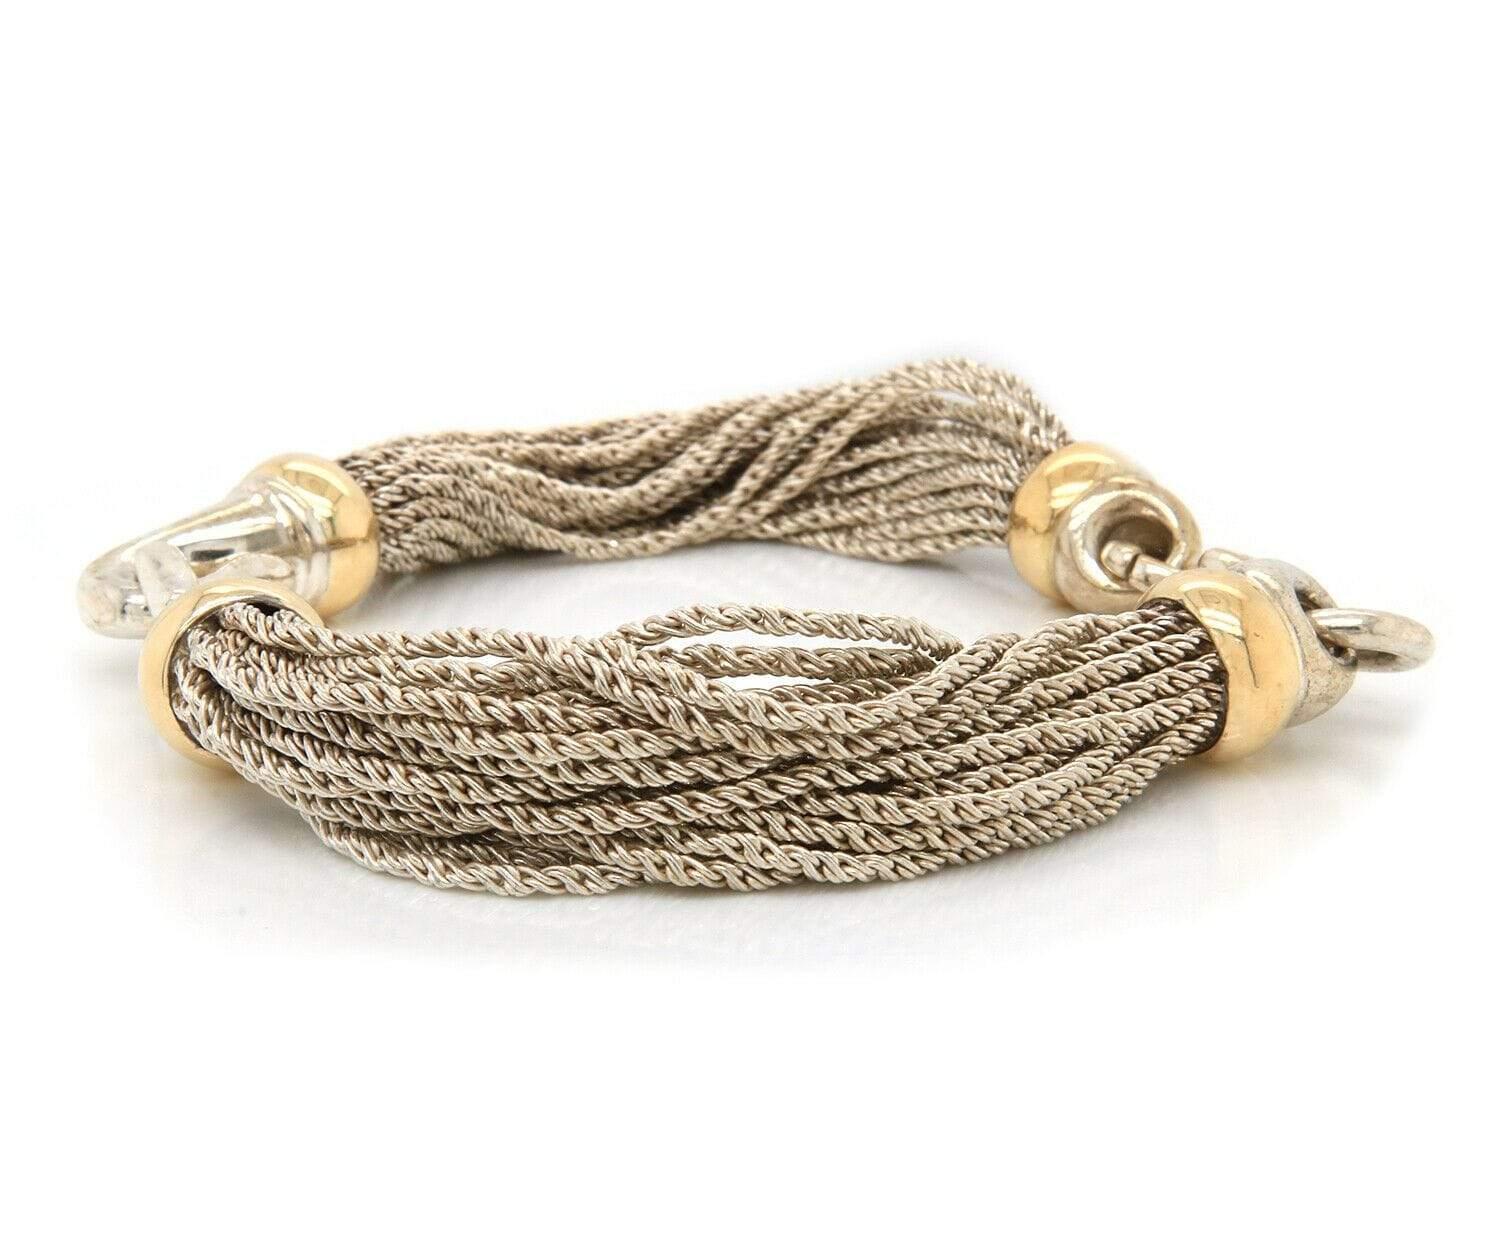 Tiffany & Co. Multi Strand Two Tone Bracelet in 18K and Sterling

Tiffany & Co. Multi Strand Two Tone Bracelet
18K Yellow Gold
Sterling Silver
Bracelet Width: Approx. 10.0 – 12.0 MM
Bracelet Length: Approx. 7.5 Inches
Weight: Approx. 50.20